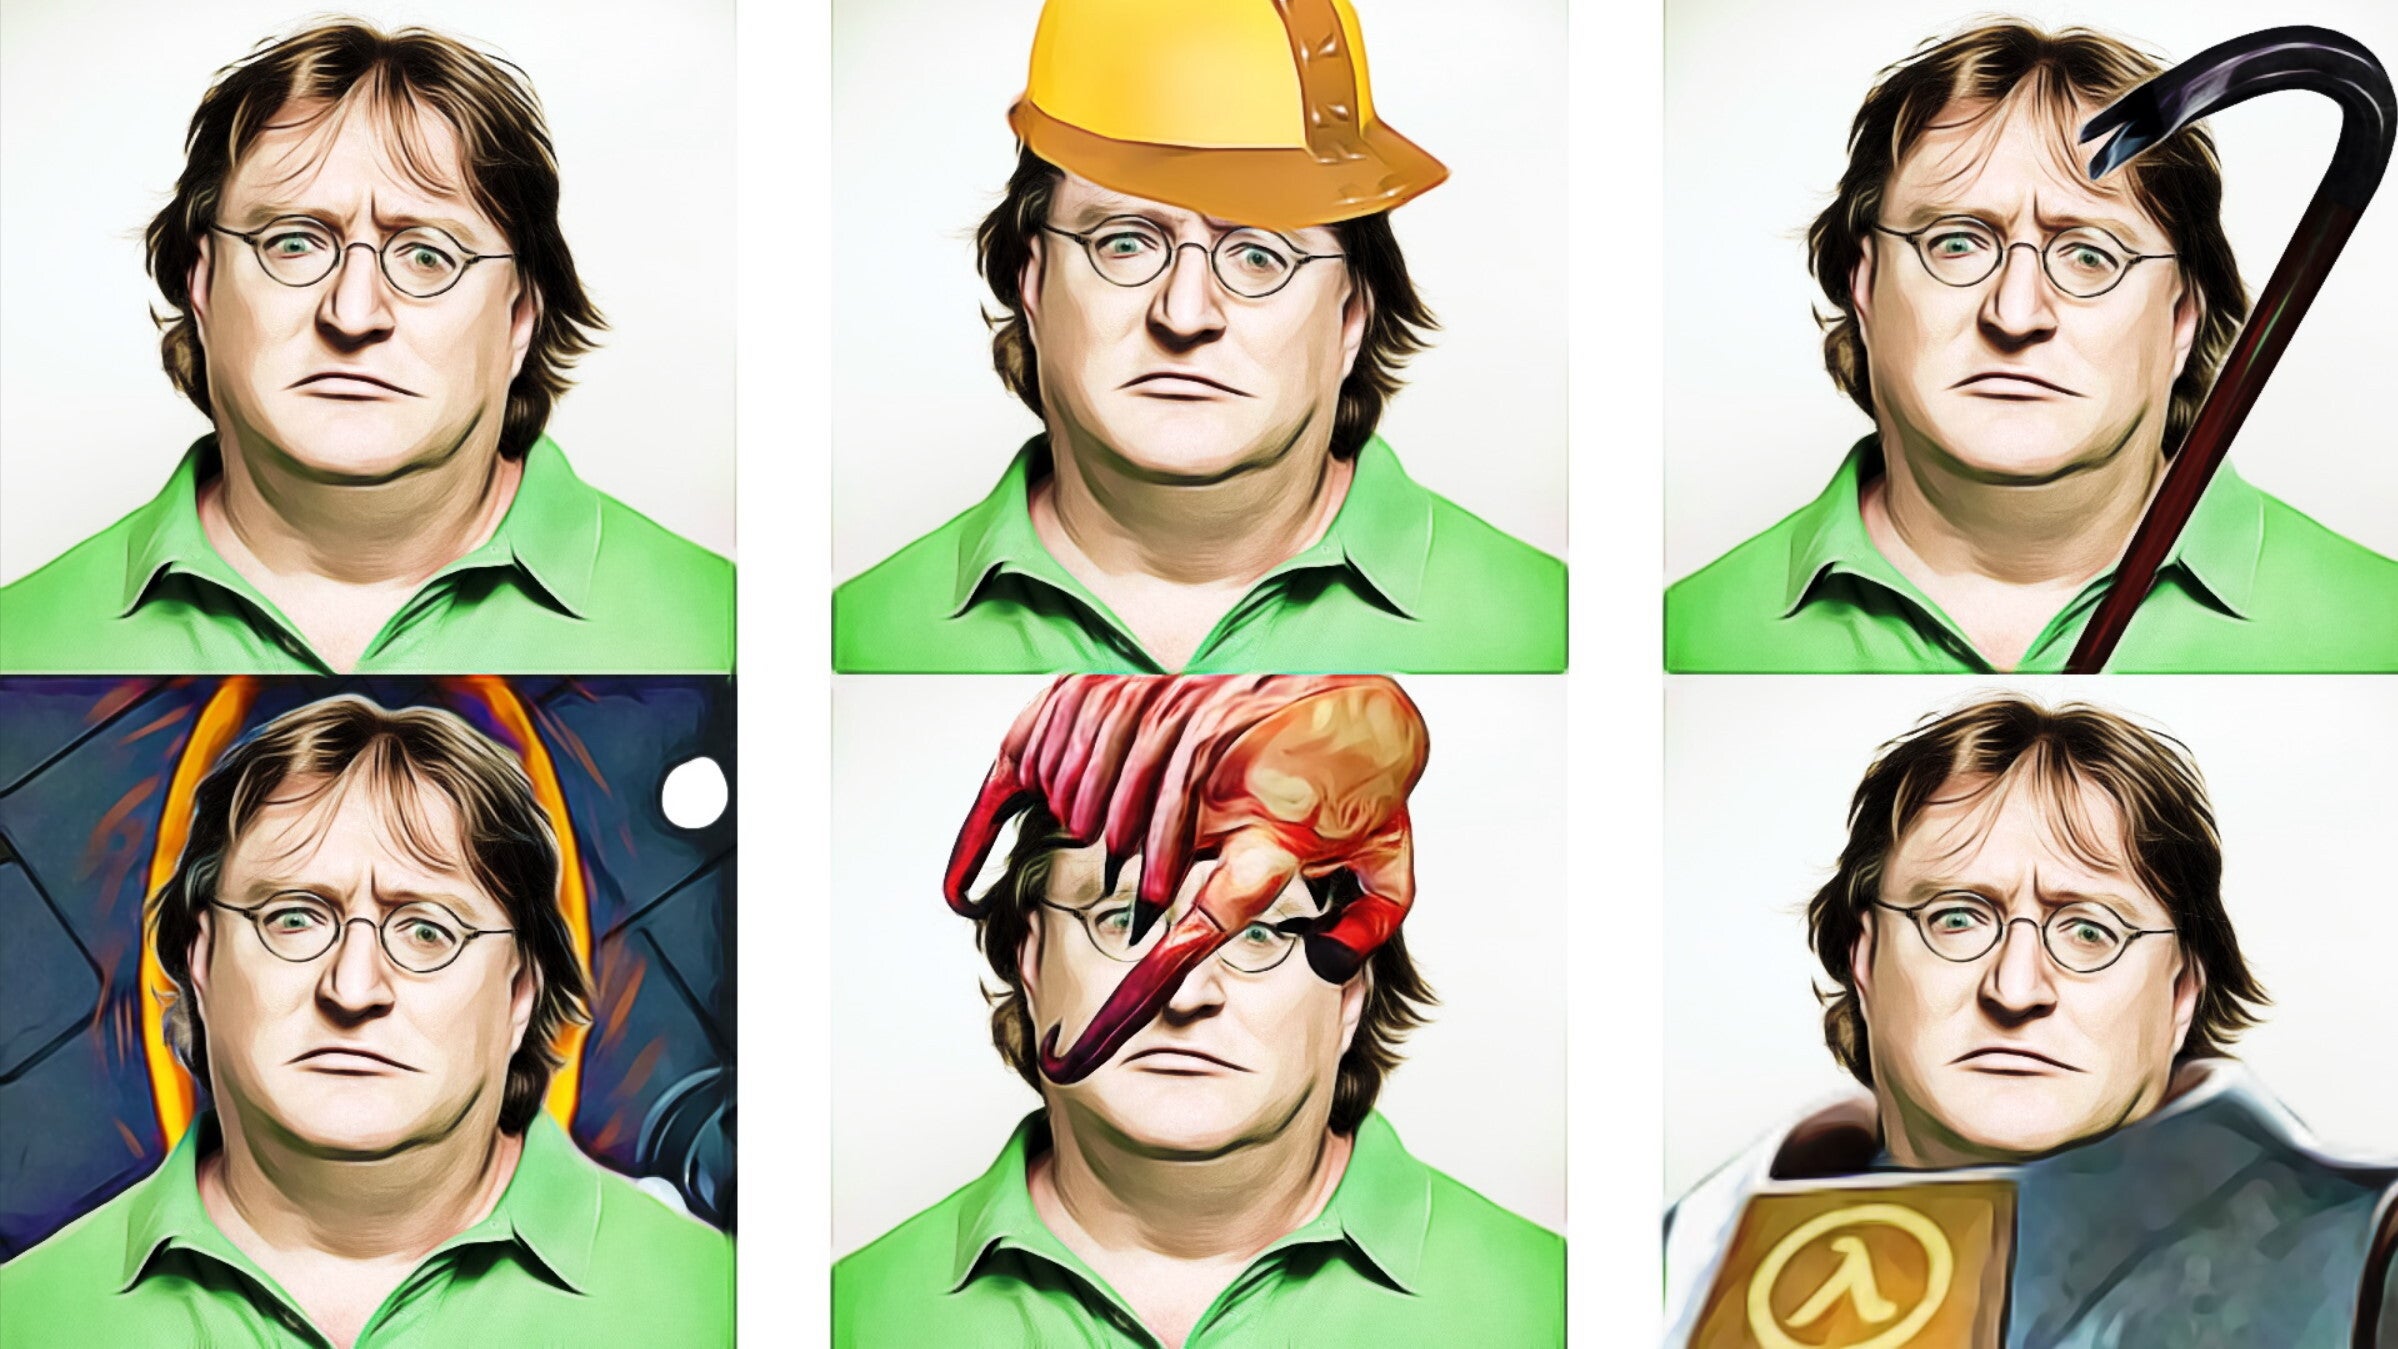 Trending Entertainment film breaking news A Bored Ape NFT-style collage of Gabe Newell portraits, with different Valve-themed hats and backgrounds.